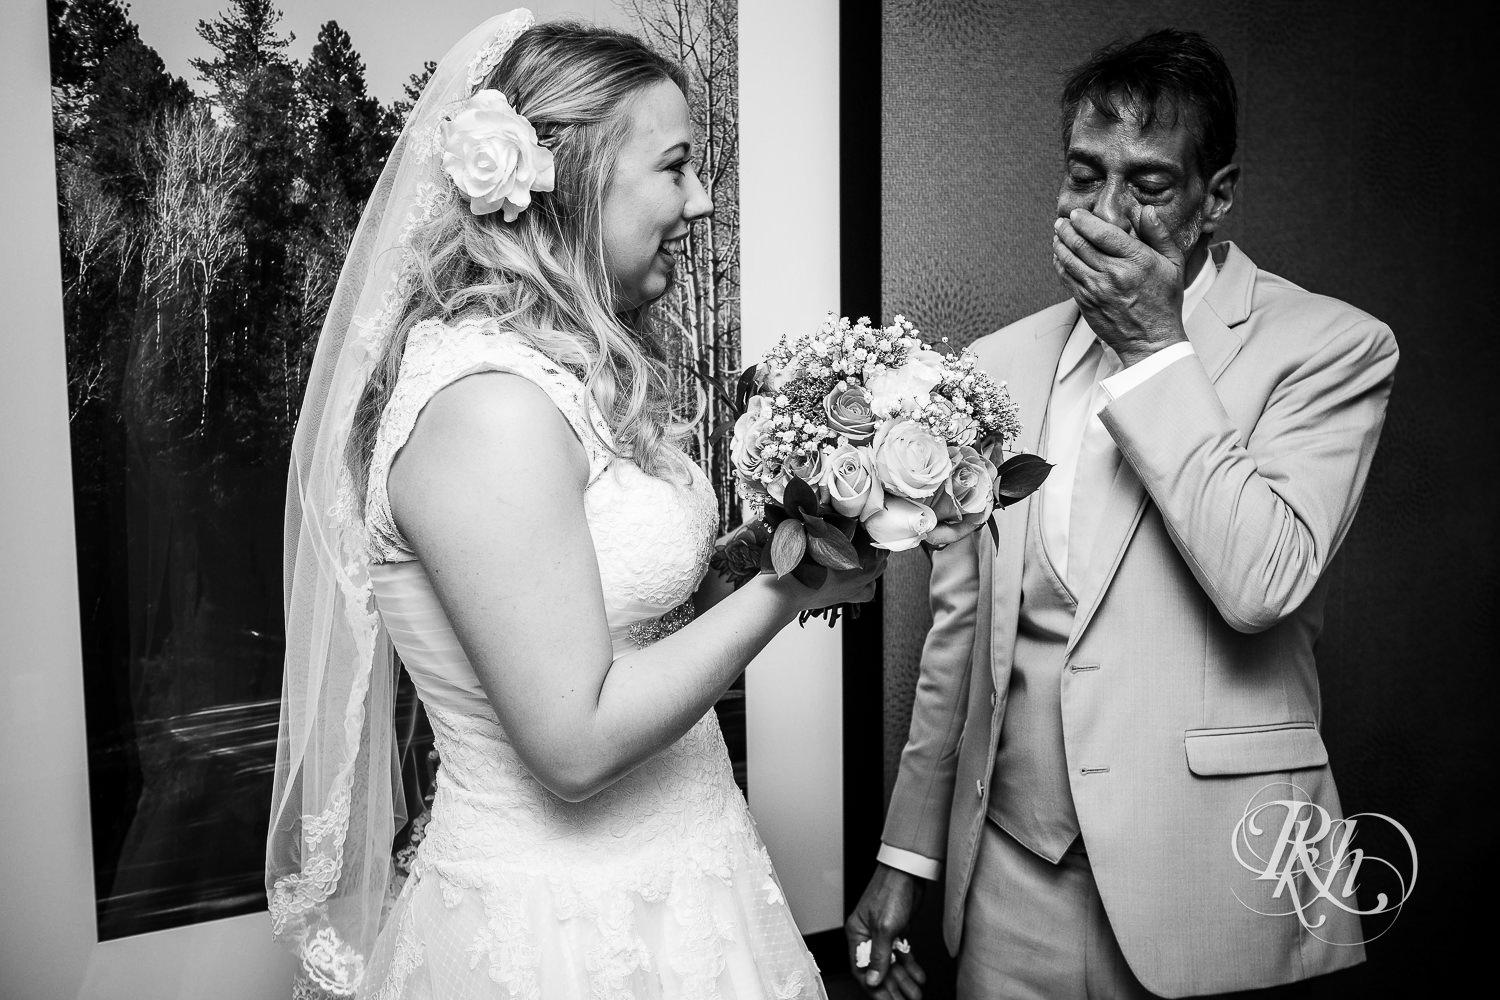 Bride's dad cries after wedding ceremony at North Metro Event Center in Shoreview, Minnesota.